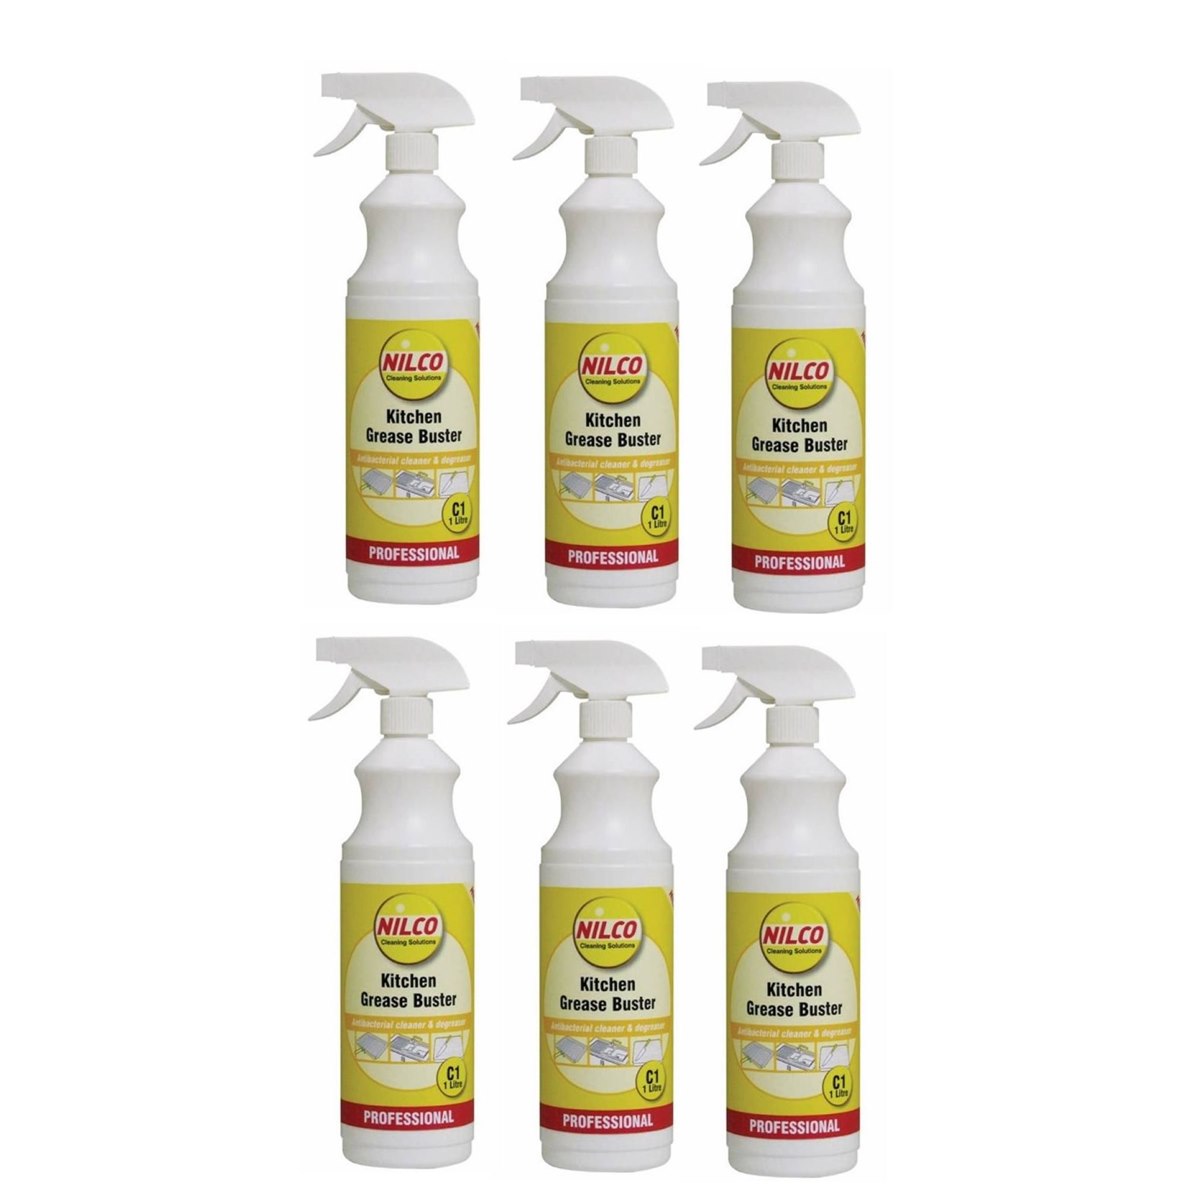 Nilco Kitchen Grease Buster Spray 1 Litre x 6